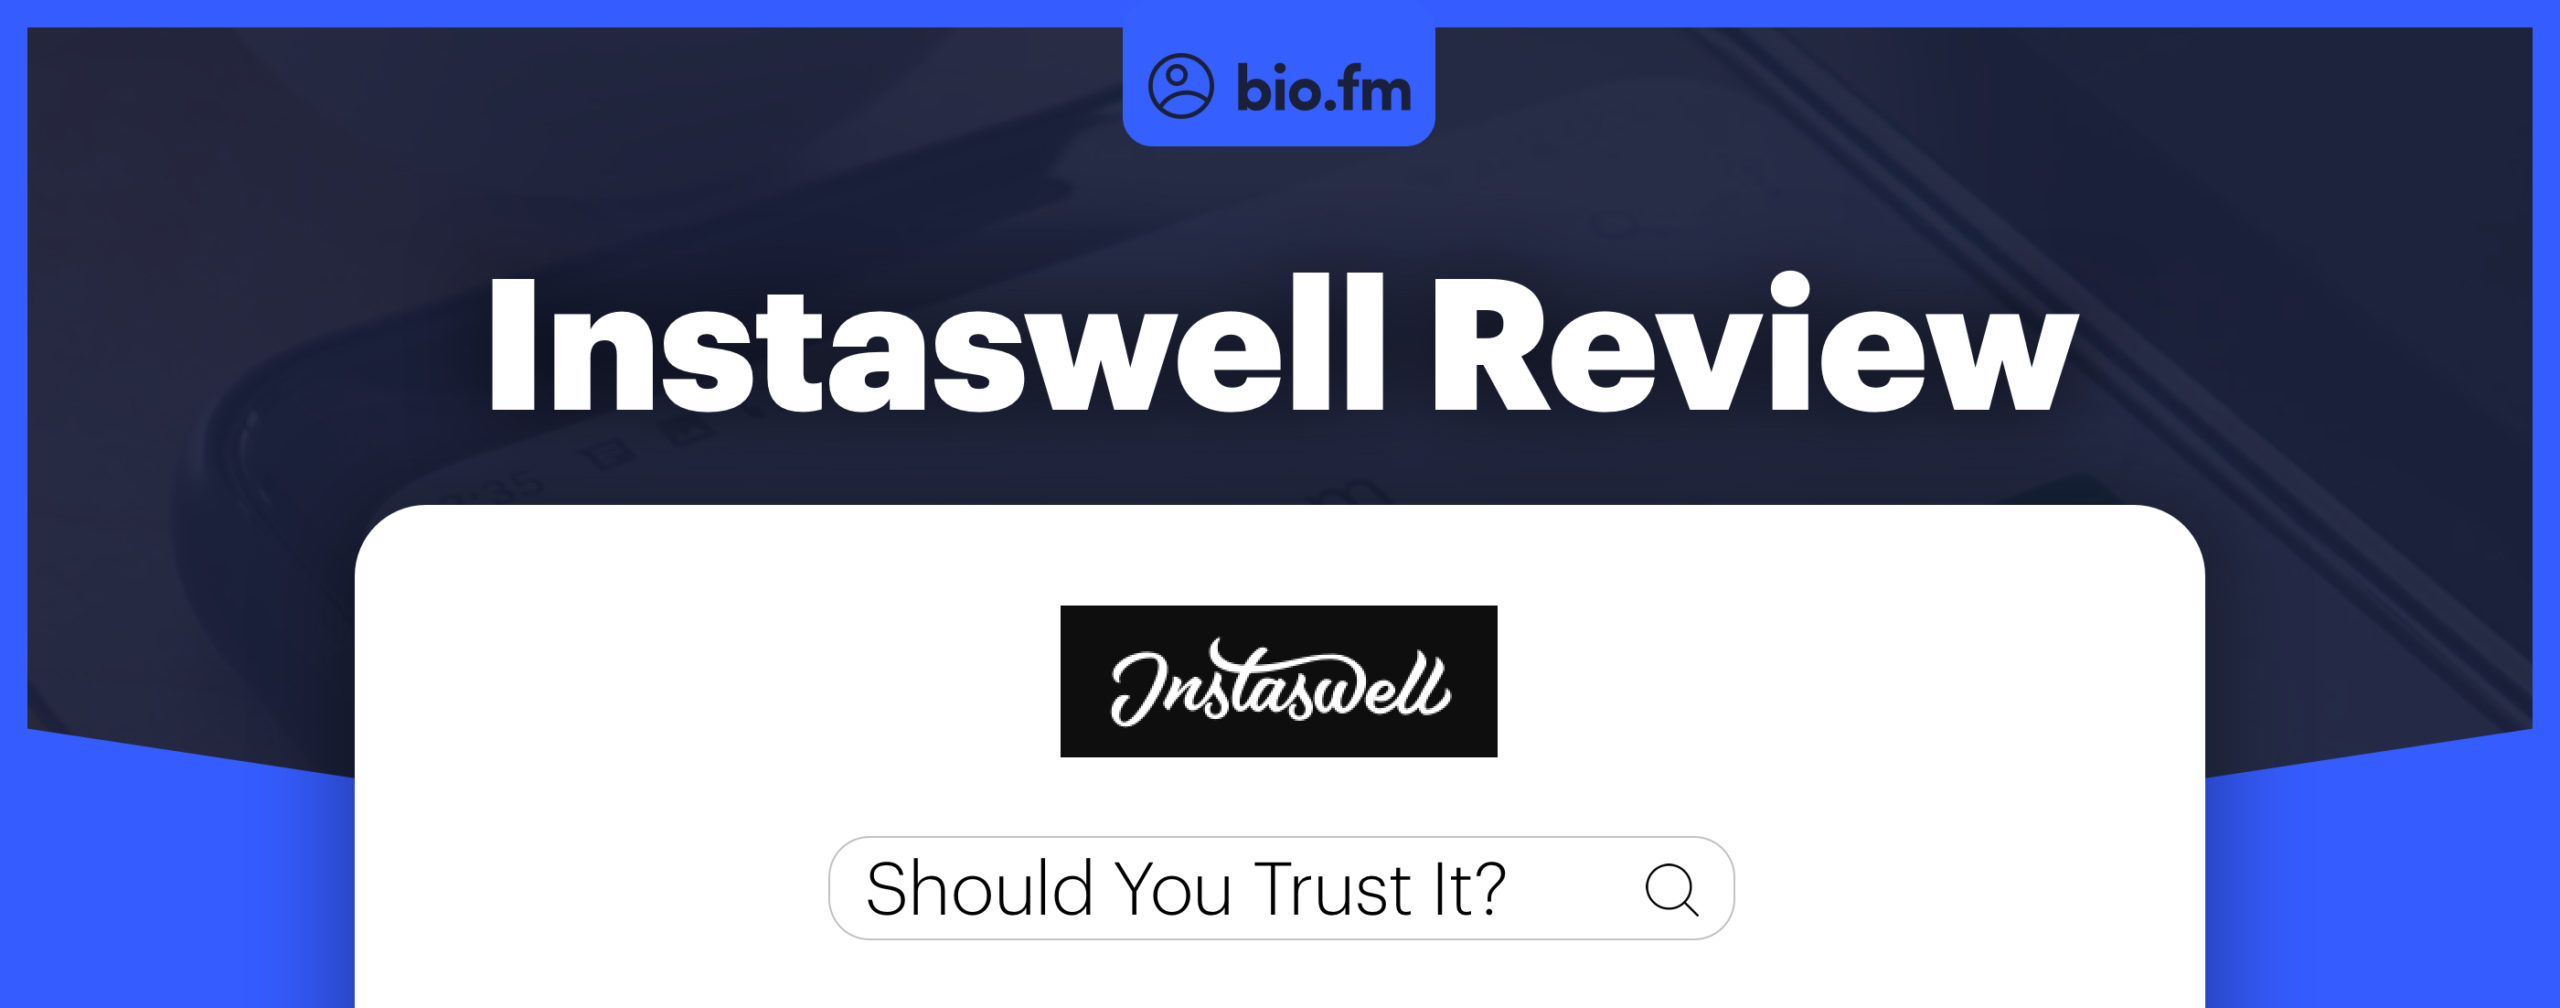 instaswell review featured image